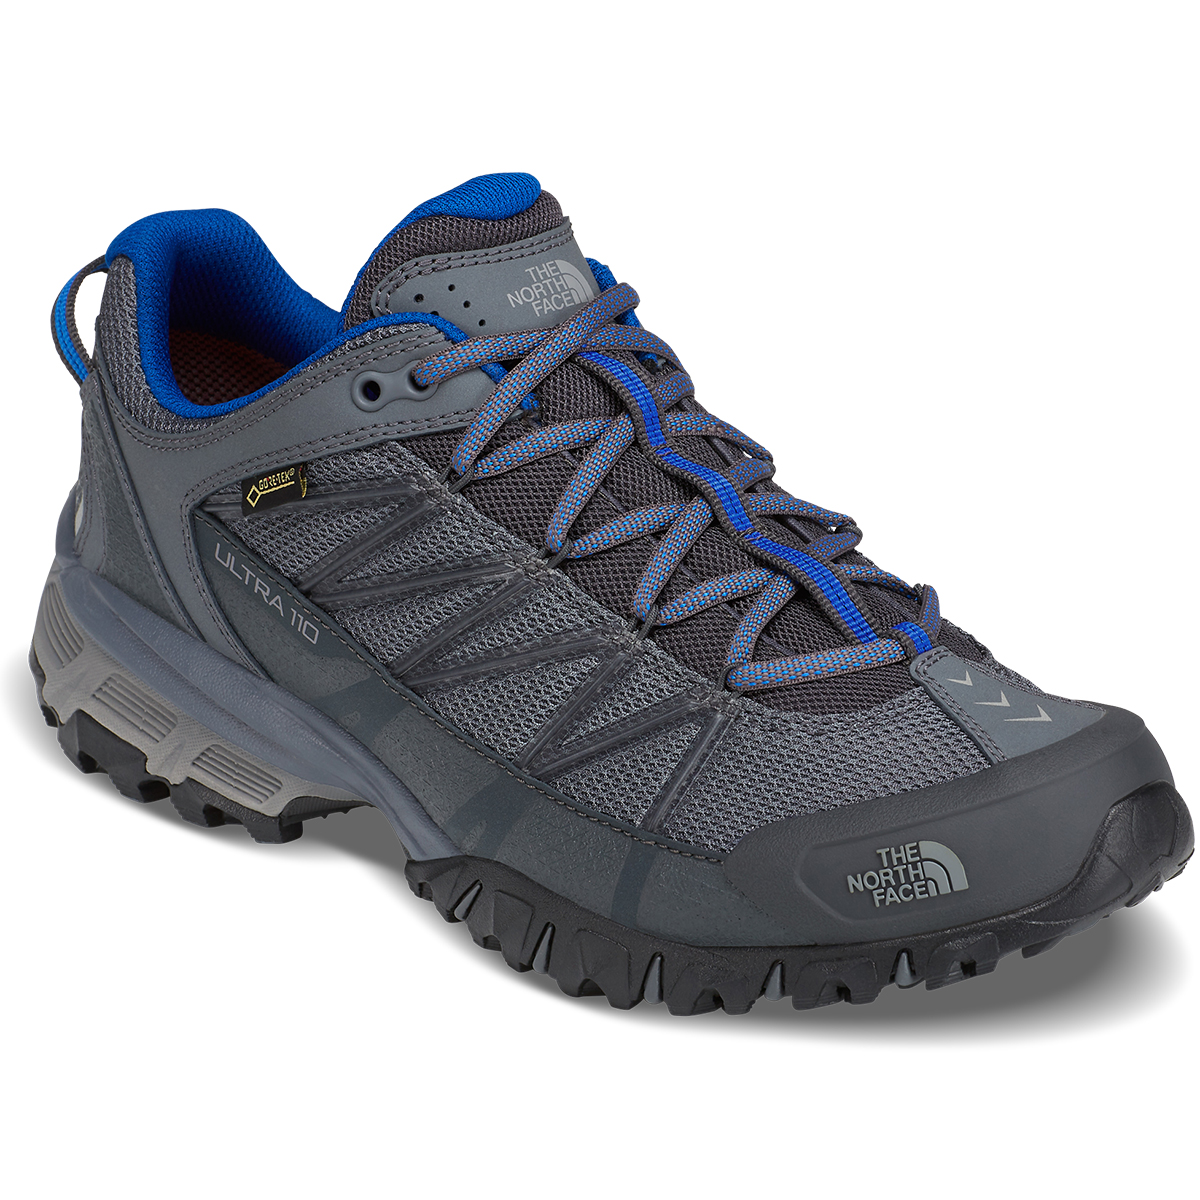 The North Face Men's Ultra 110 Gtx Waterproof Trail Running Shoes - Black, 9.5